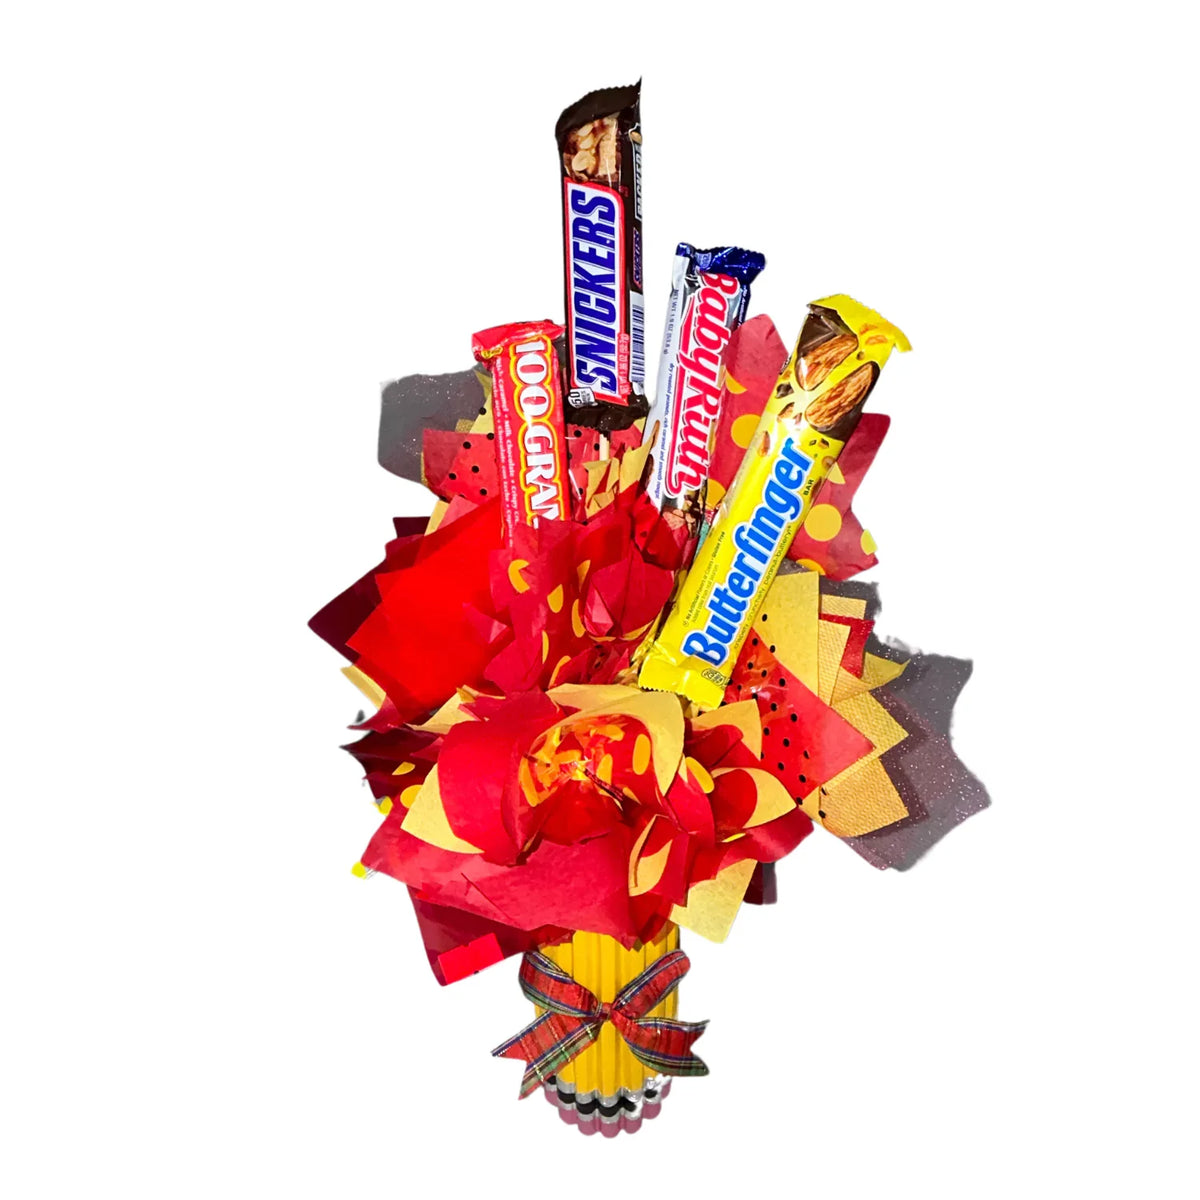 Milk Chocolate Bar Candy Bouquet in Yellow Red Pencil Vase